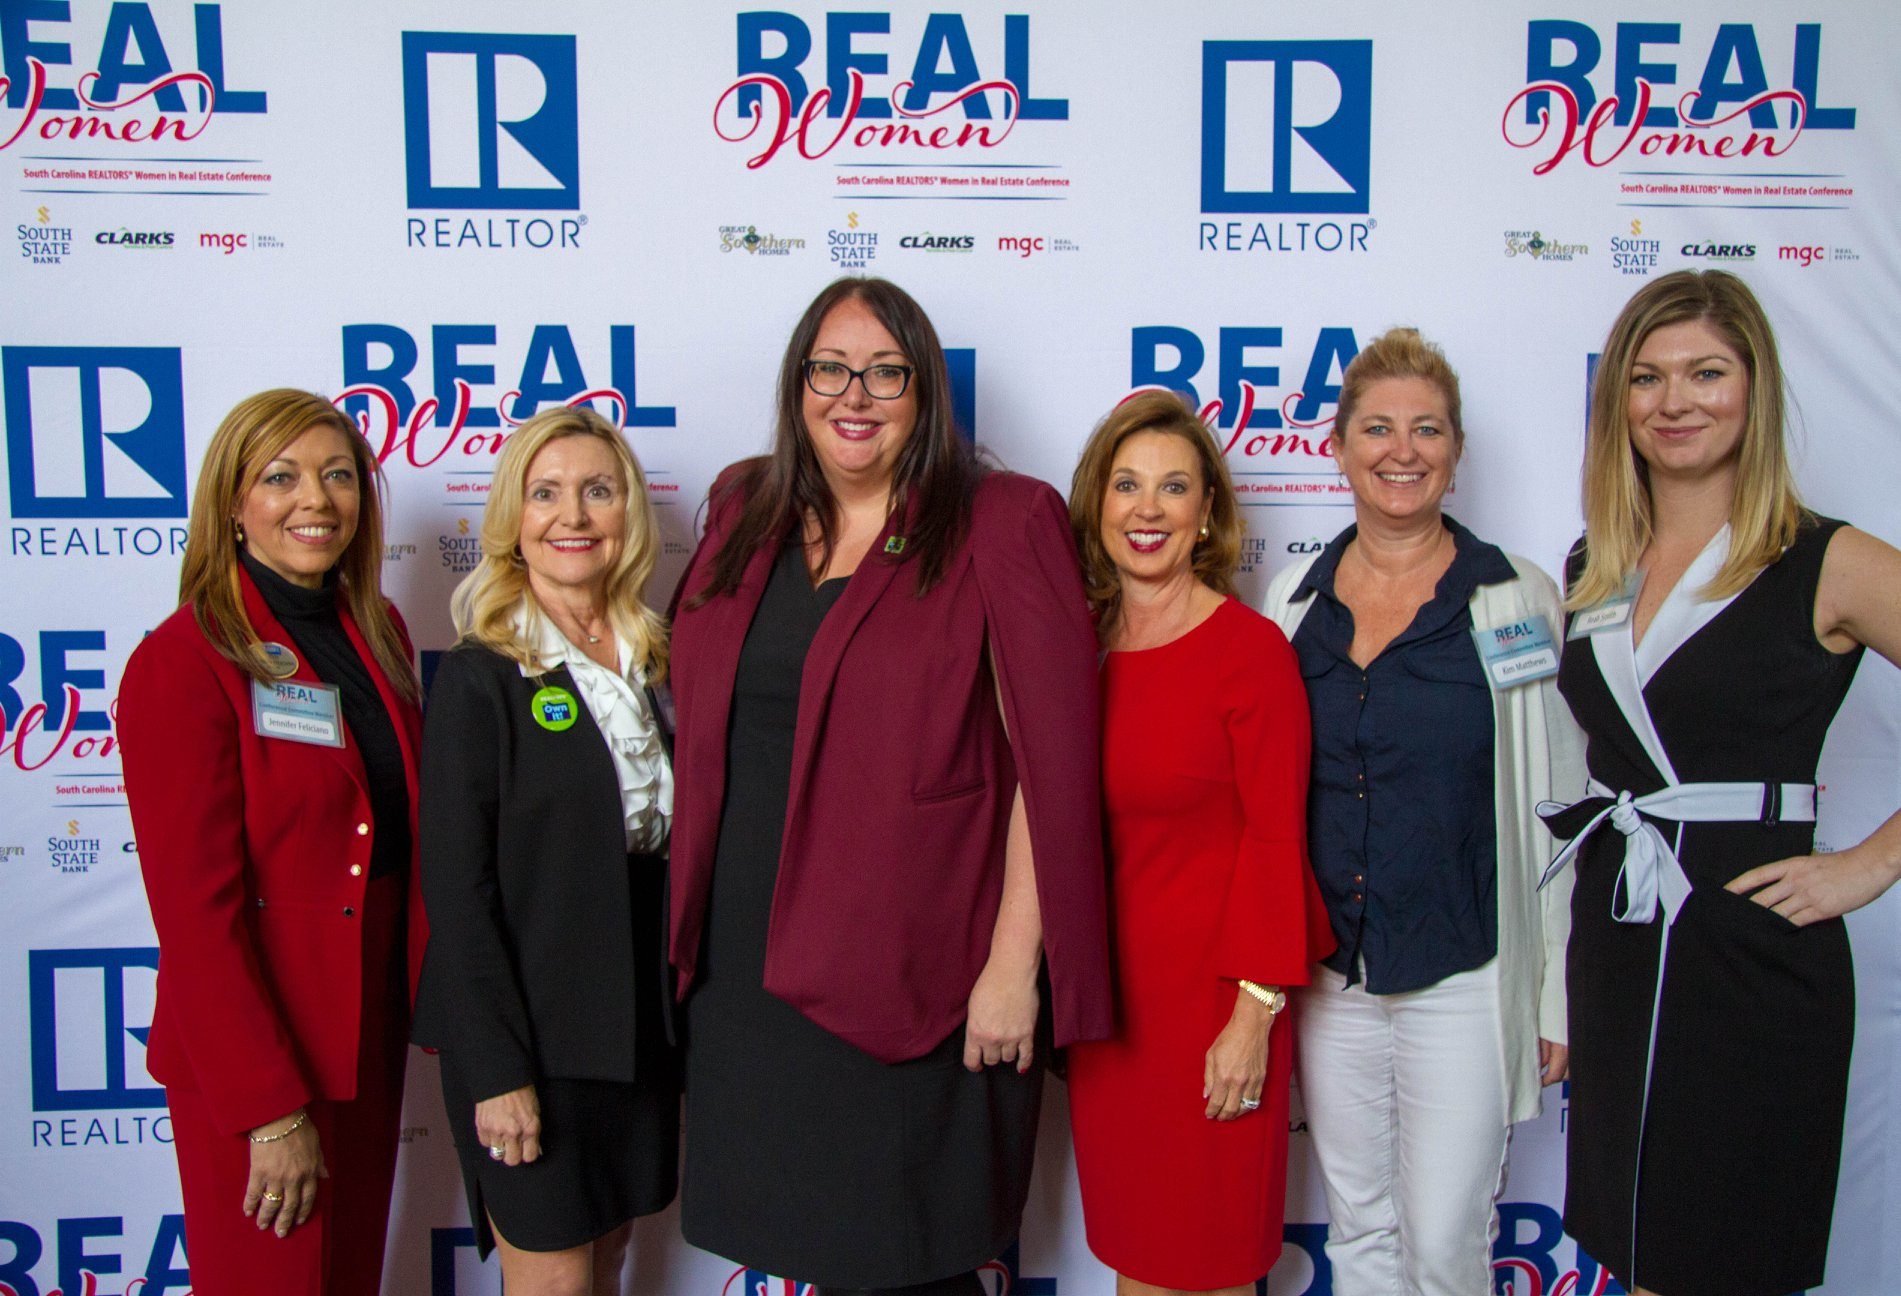 Attendees of the South Carolina REALTORS® REAL Women: SC Women in Real Estate conference